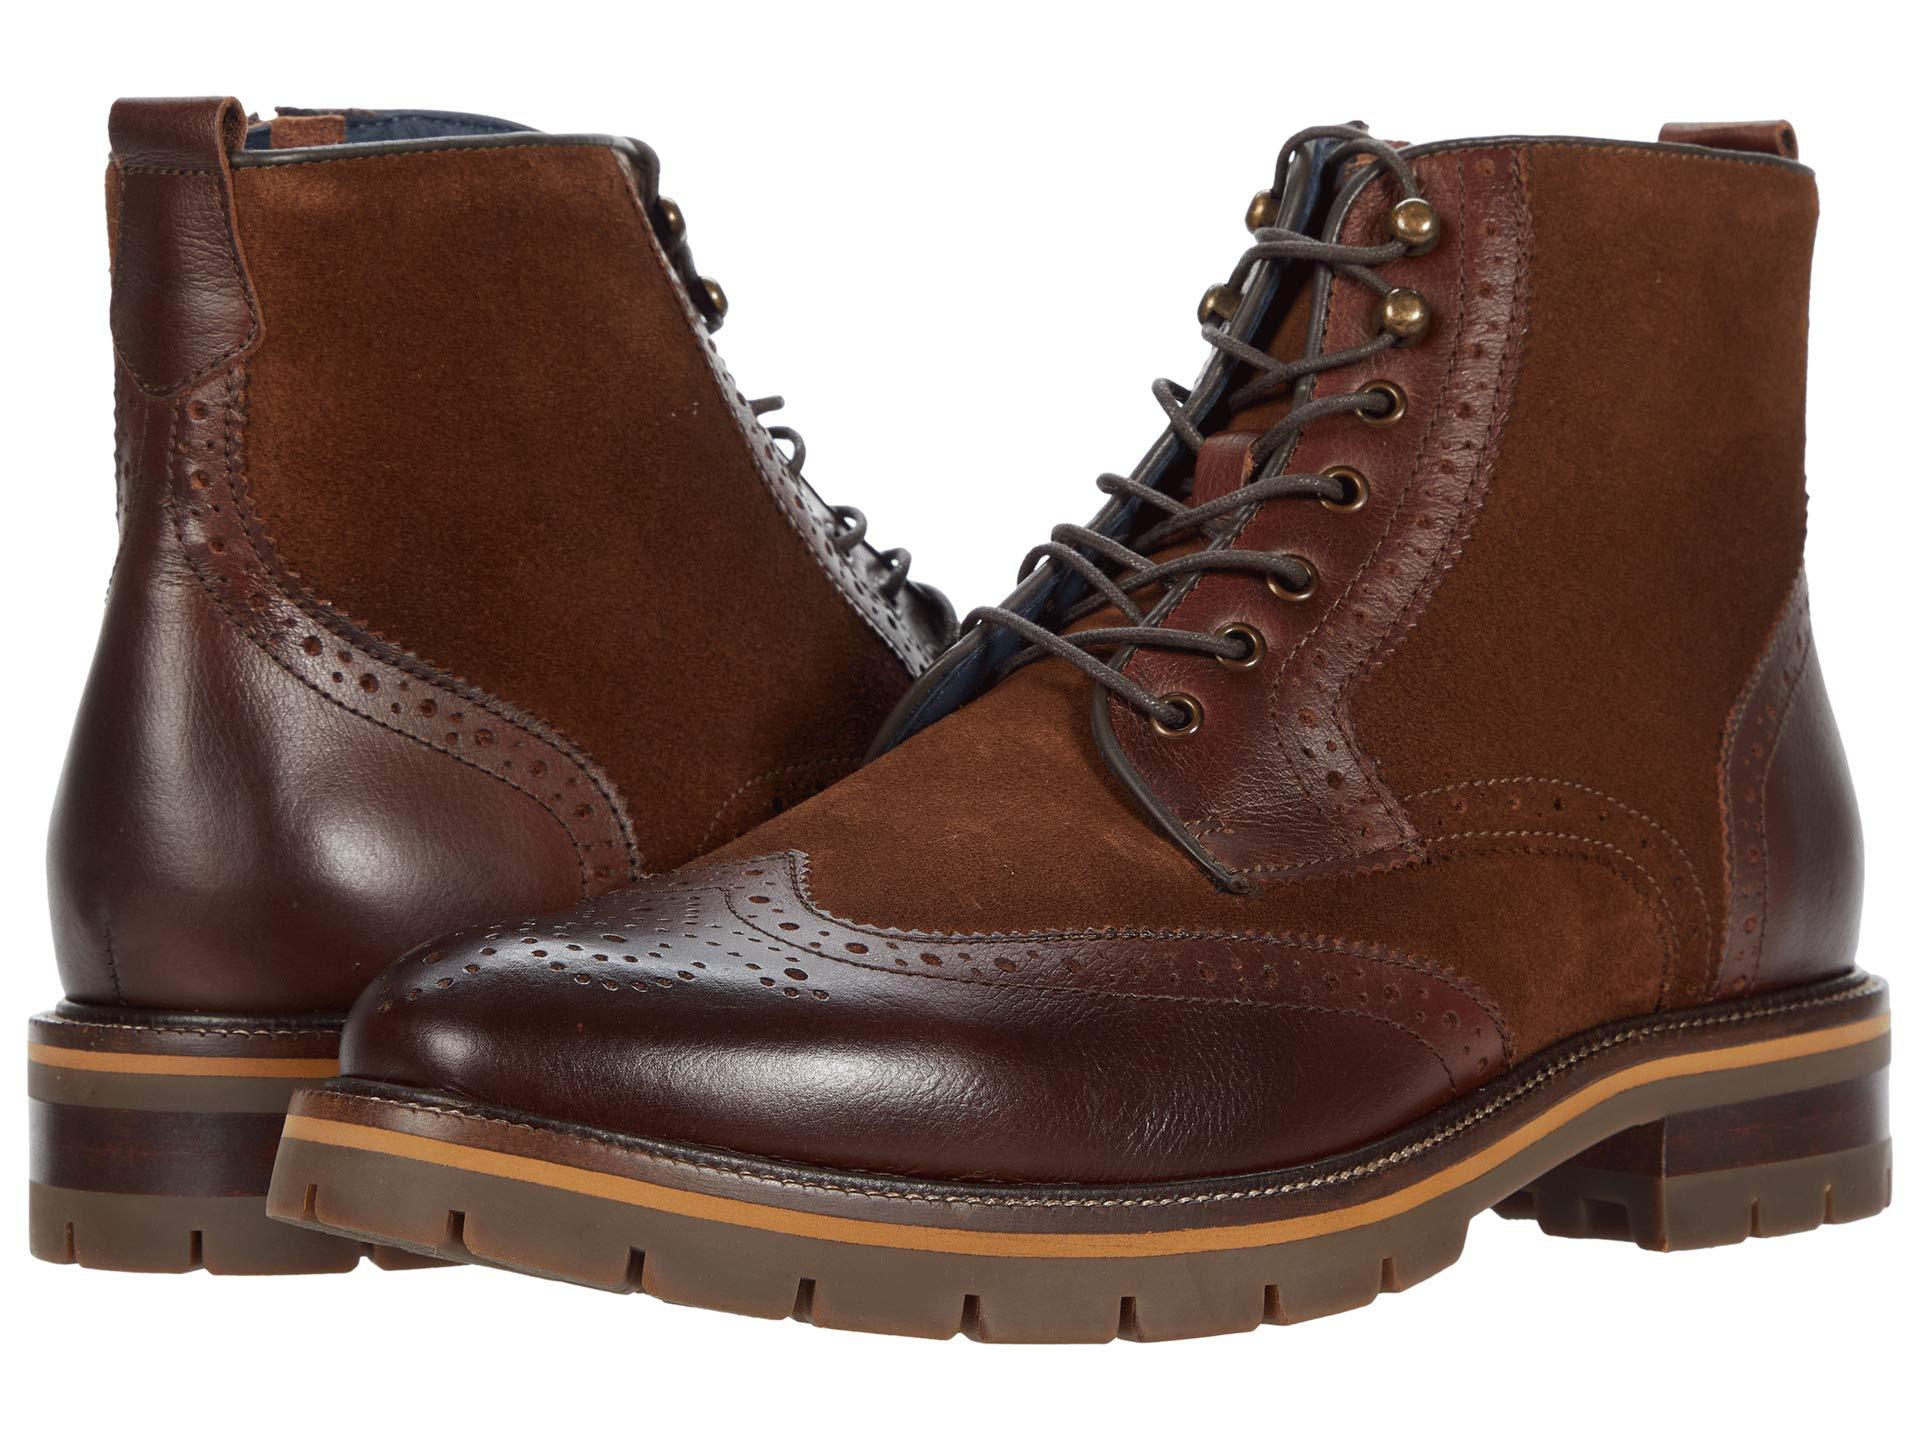 Johnston & Murphy Leather Cody Wing Tip Zip Boot in Brown for Men - Lyst